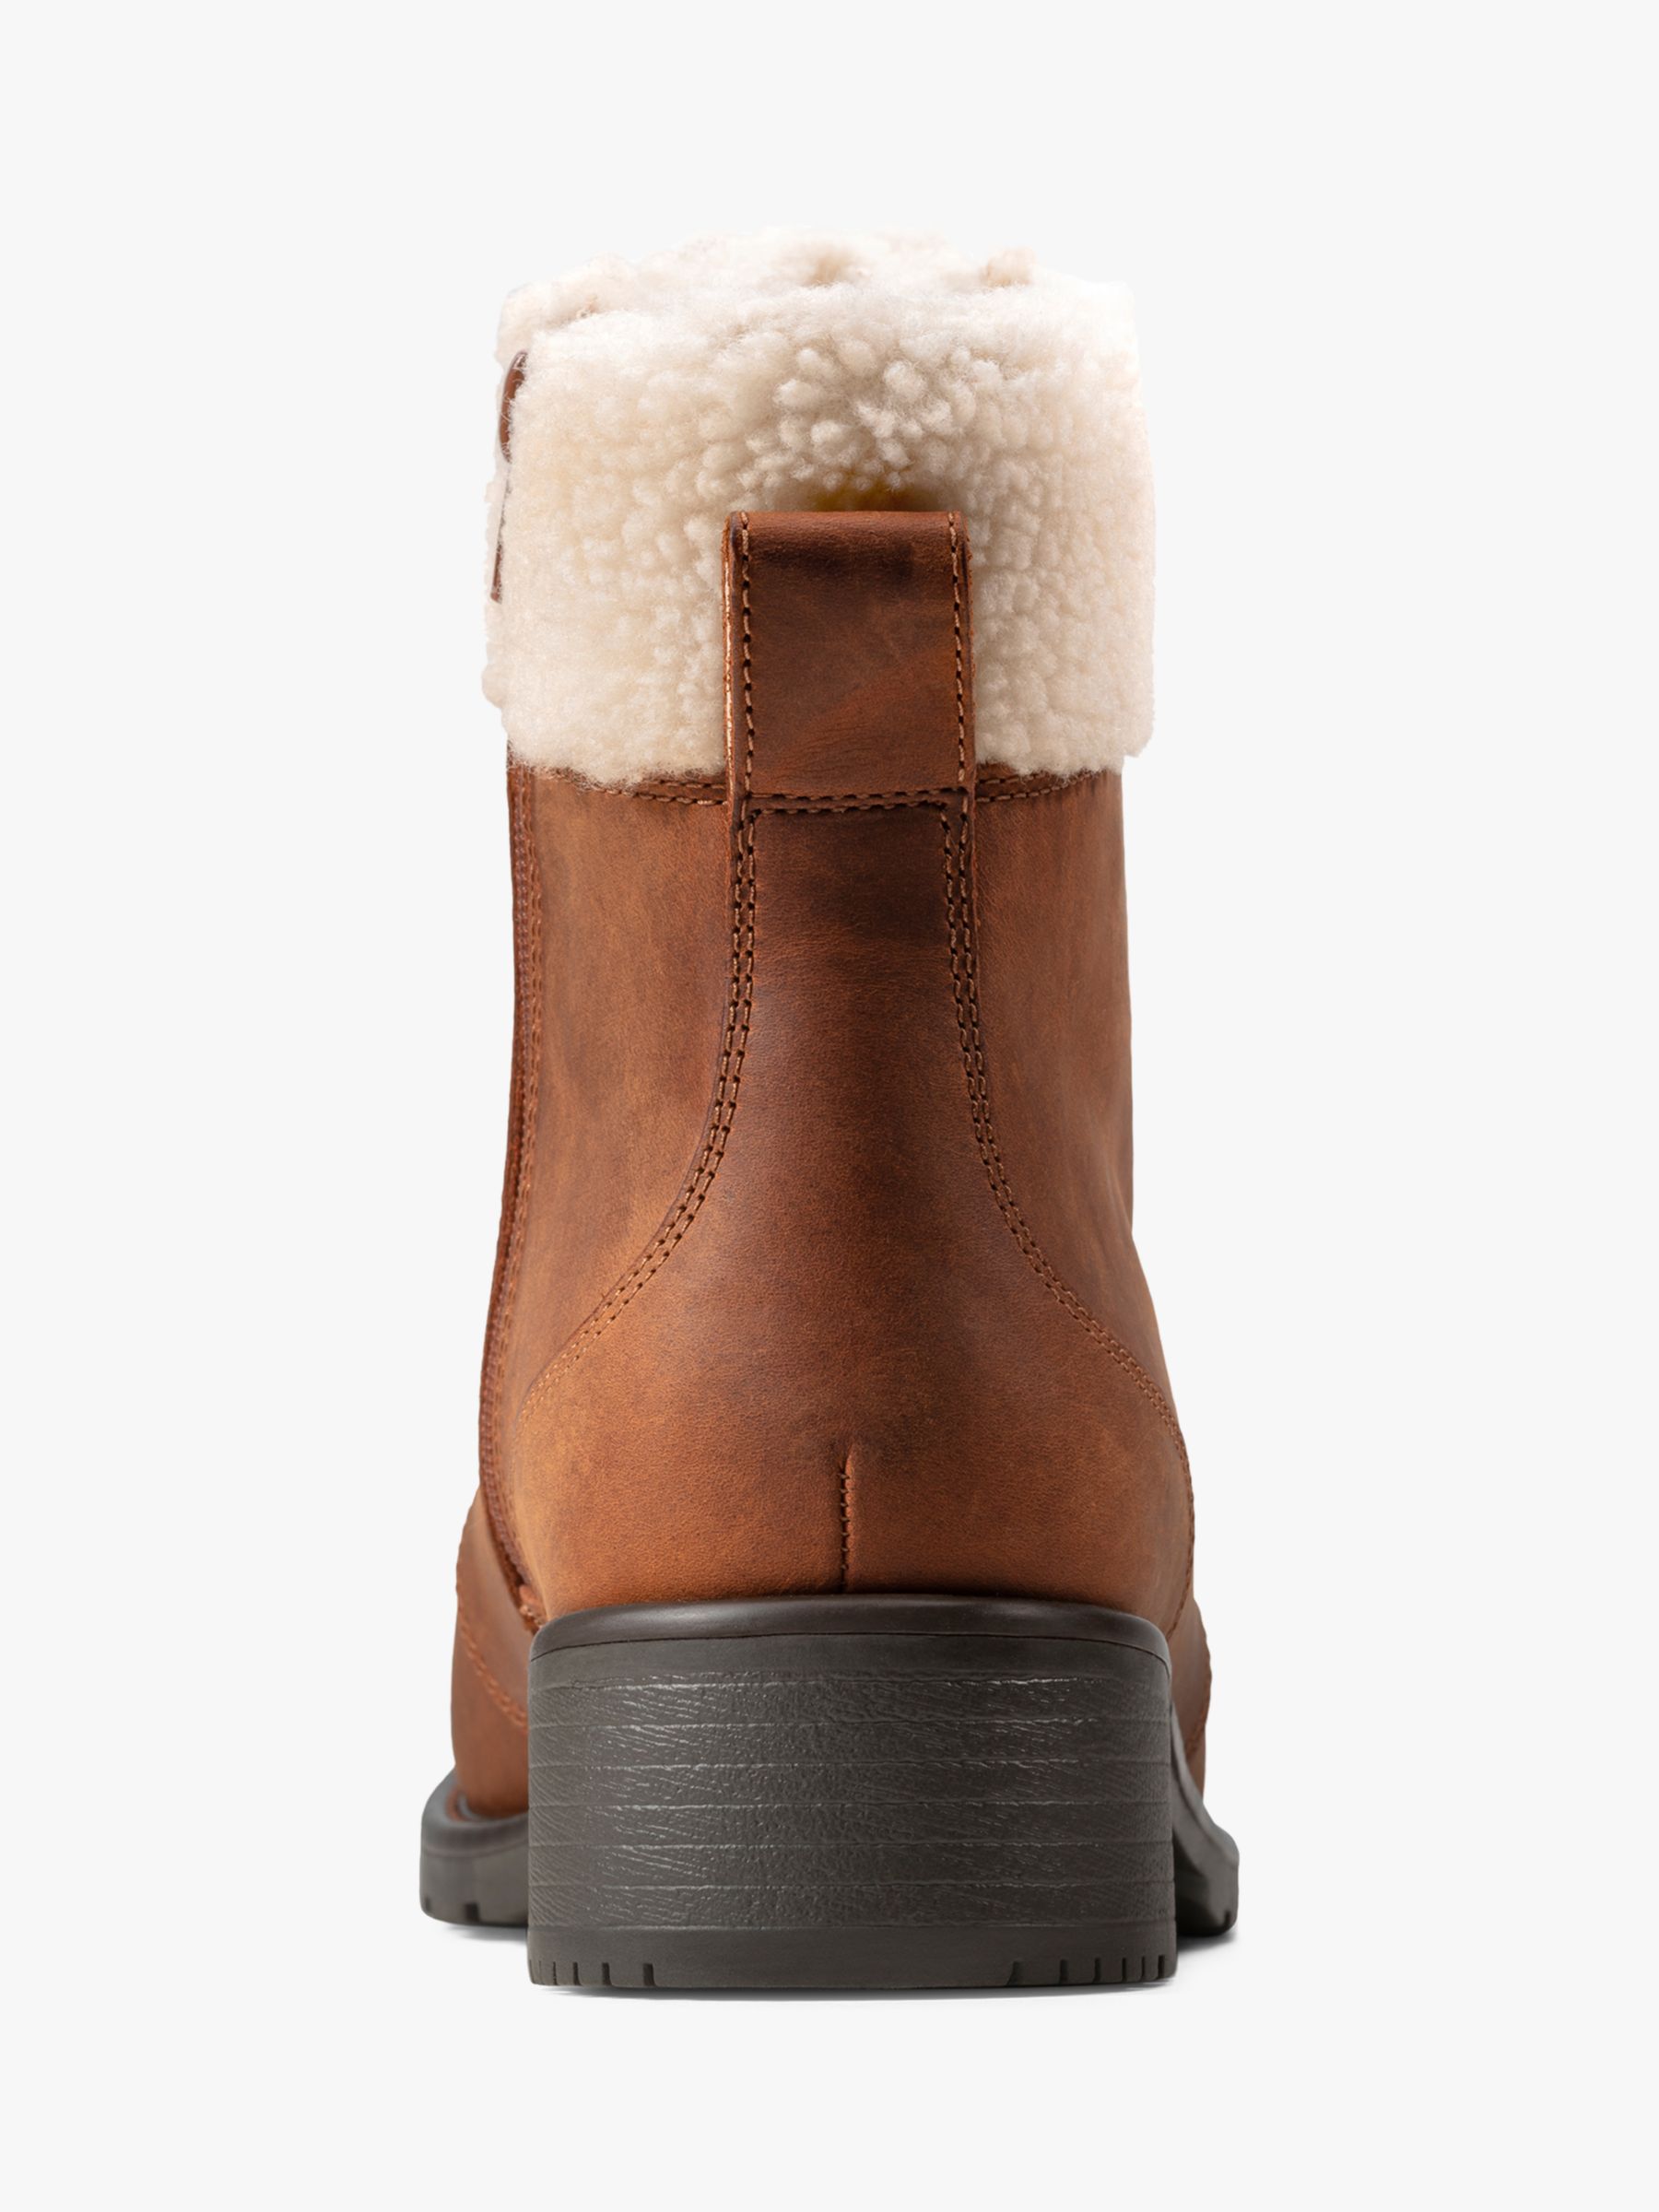 clarks fur lined ankle boots